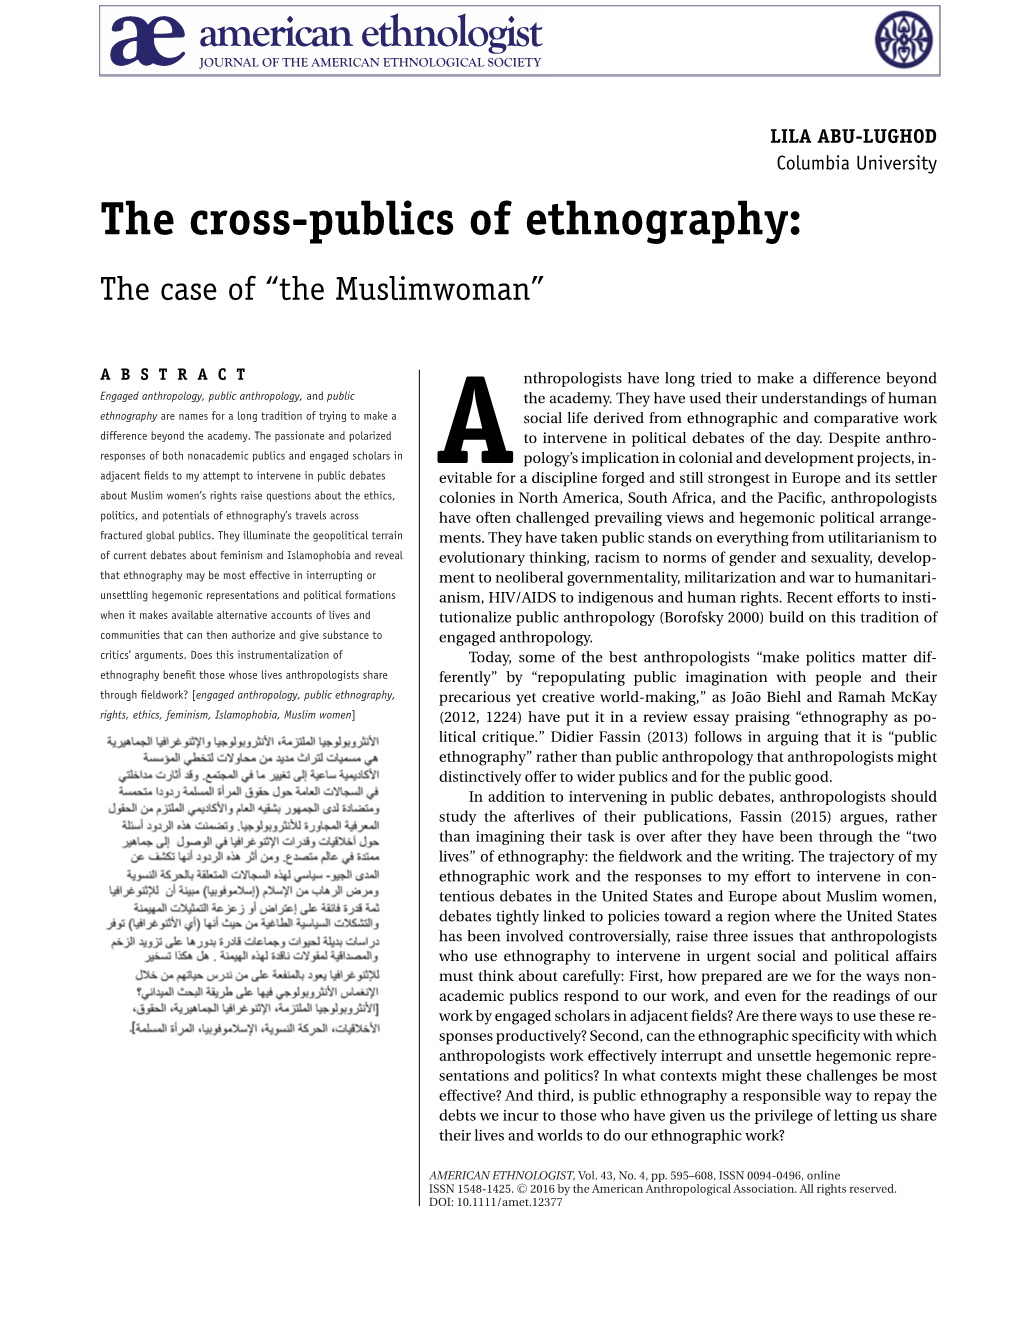 Publics of Ethnography: the Case of “The Muslimwoman”